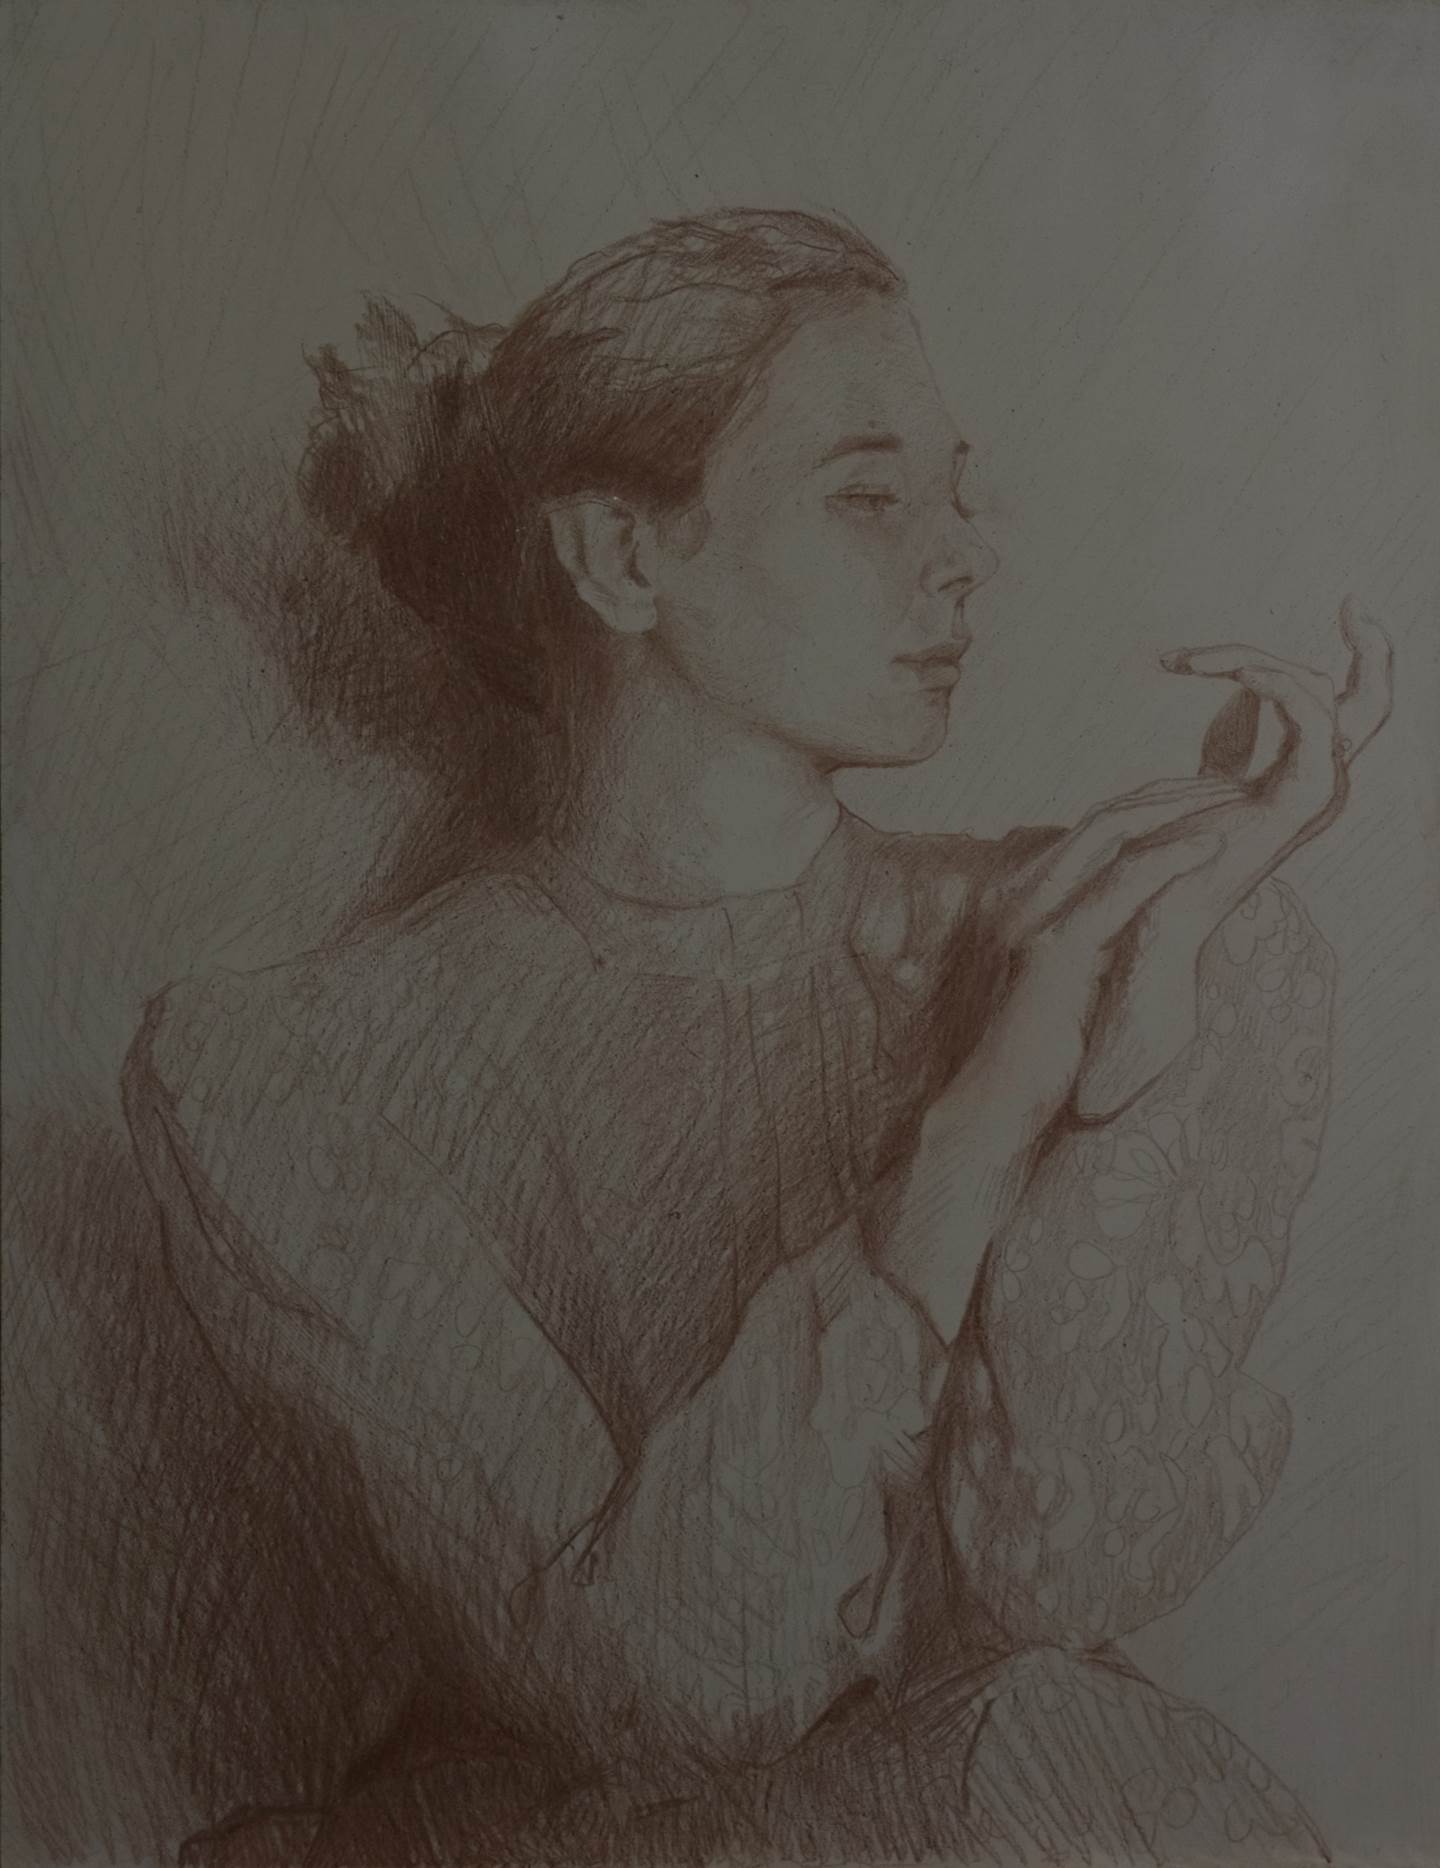 Woman in the Blue Shirt I, original Human Figure Pencil Drawing and Illustration by BeckenFilipe .